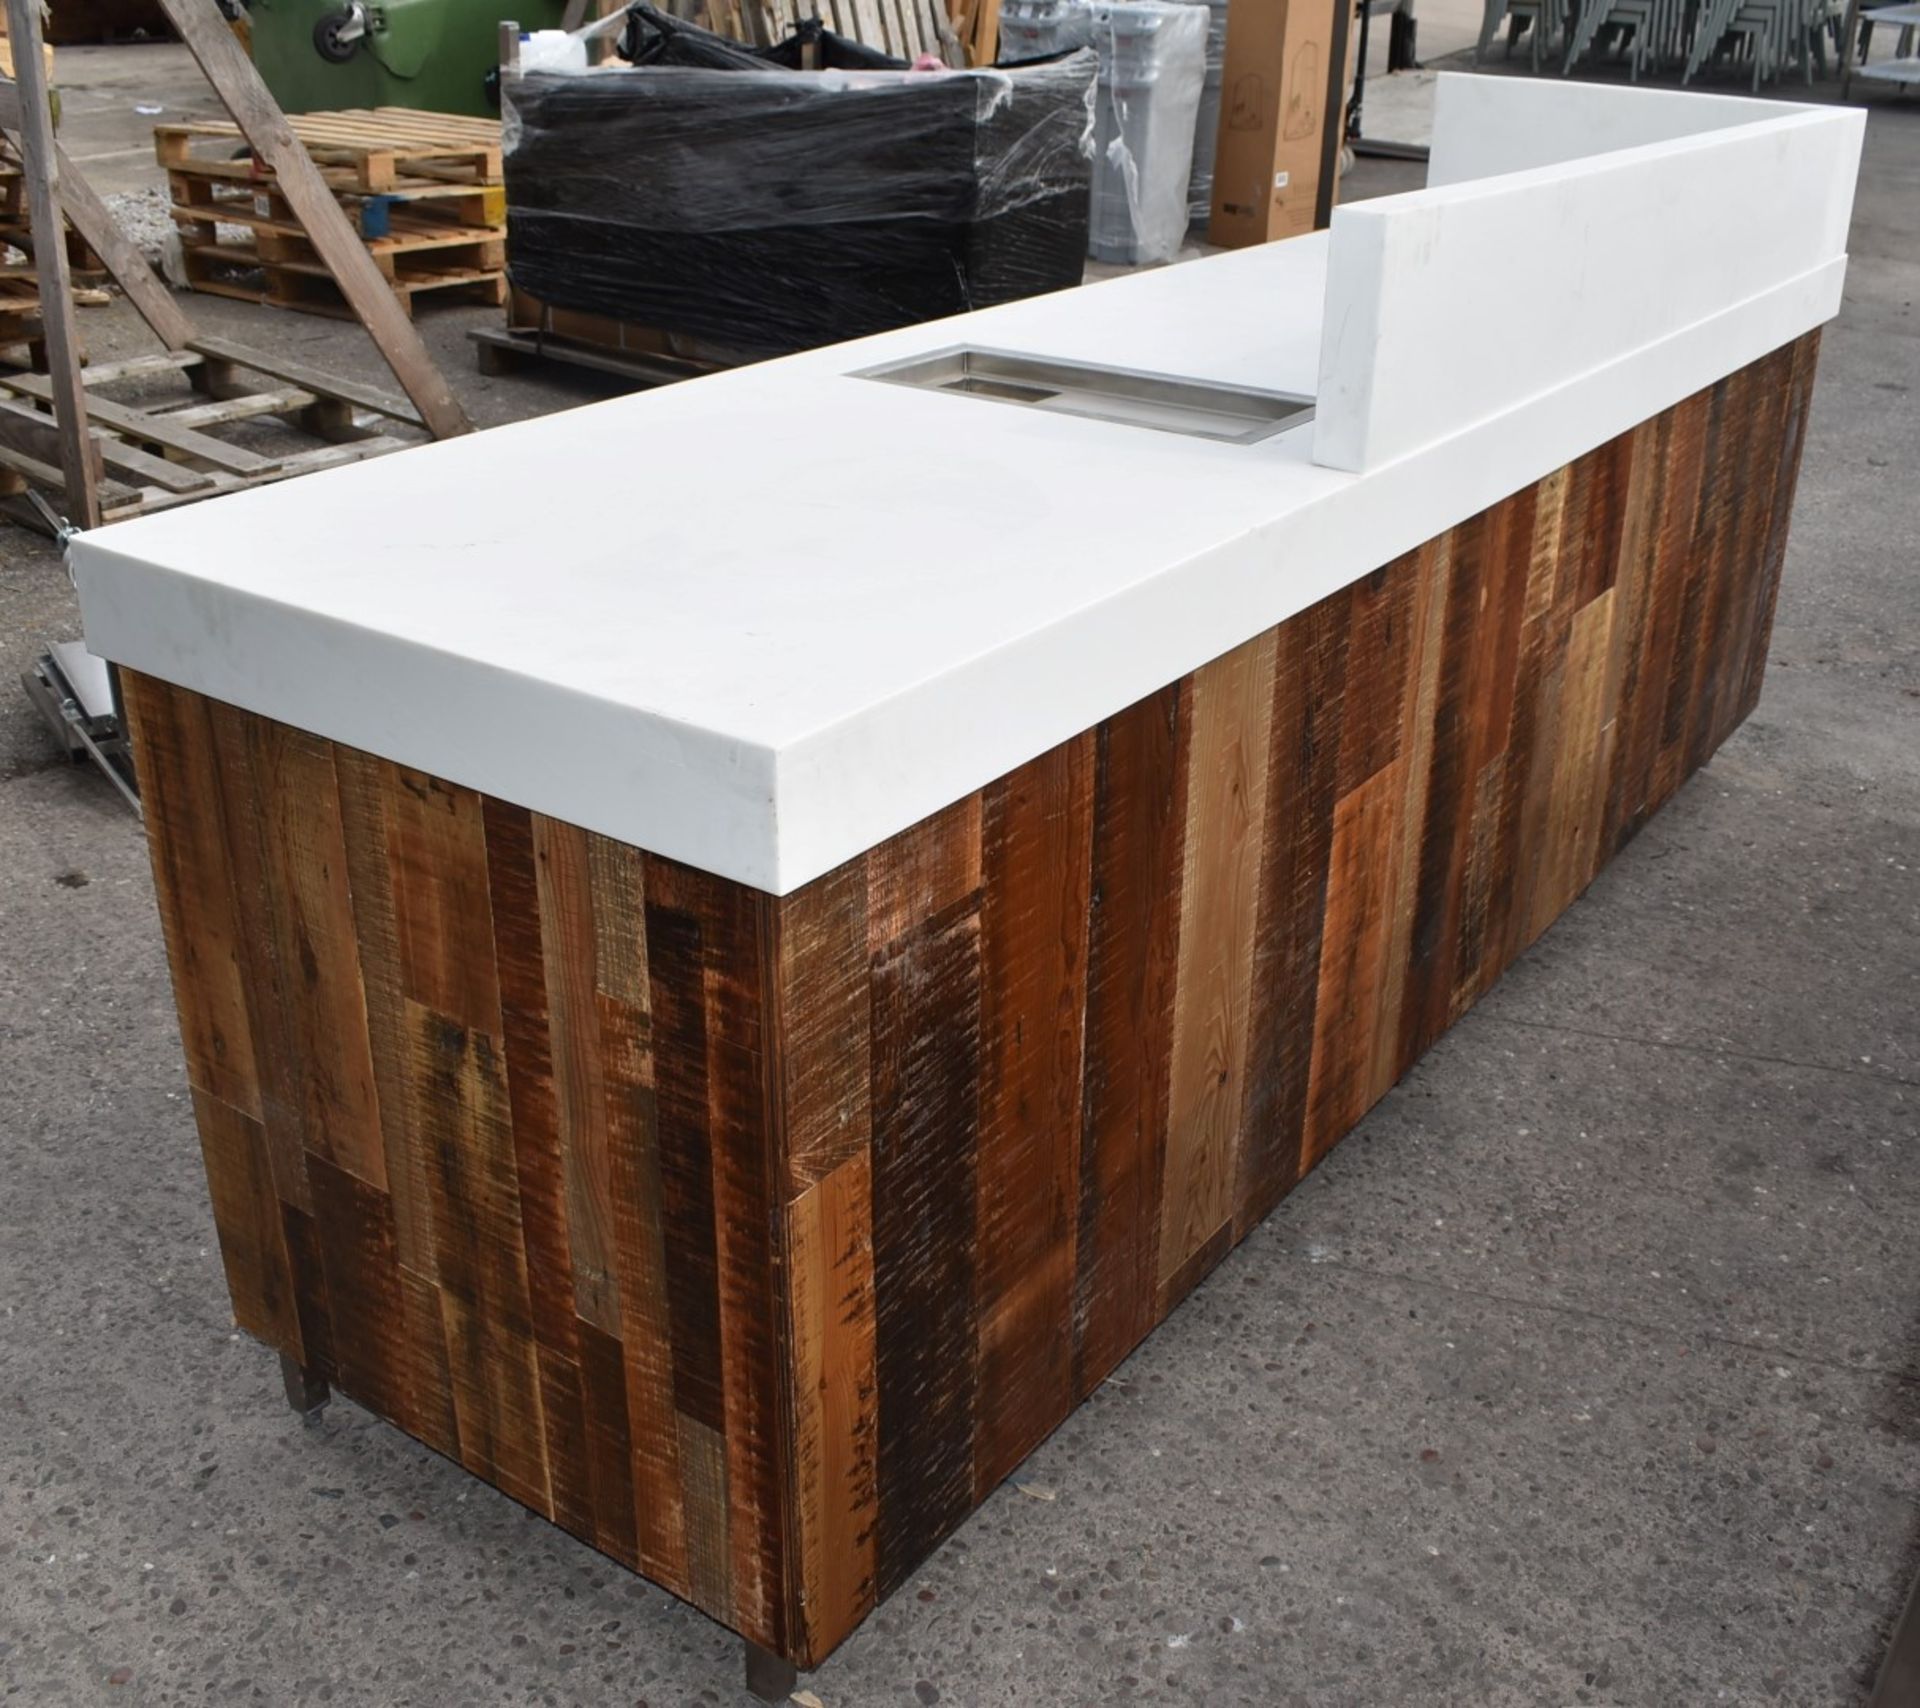 1 x Commercial Coffee Shop Preperation Counter With Natural Wooden Fascia, Hard Wearing Hygenic - Image 14 of 16